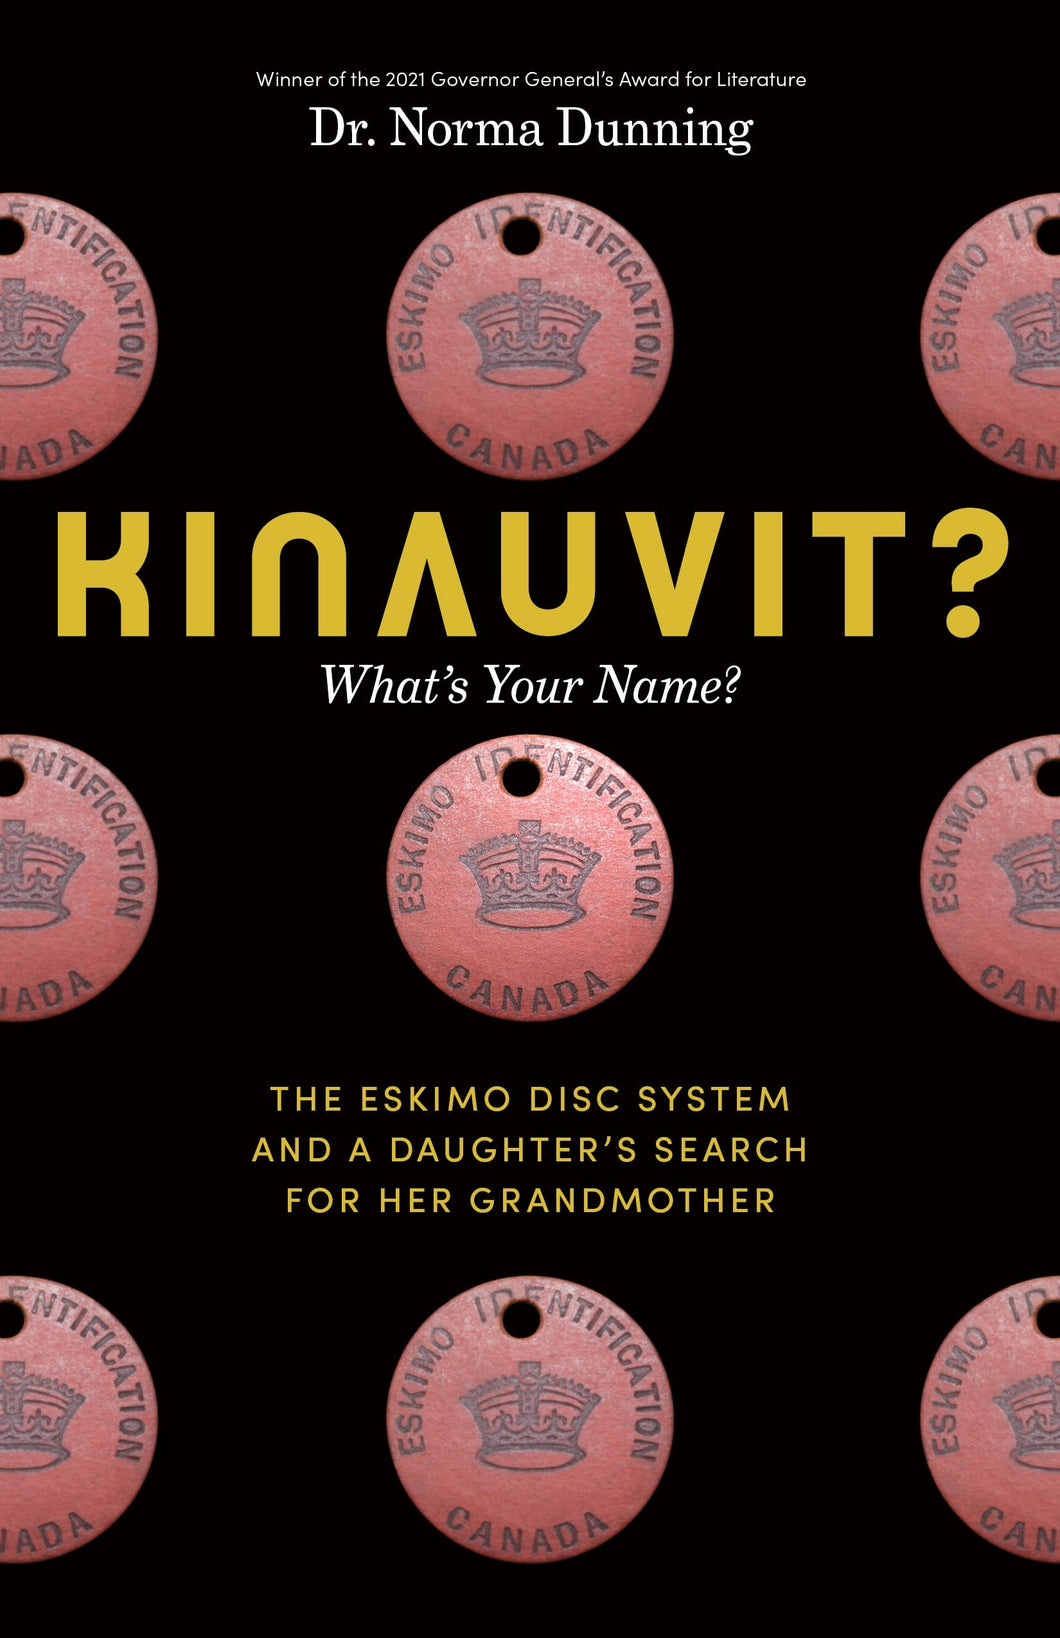 Kinauvit?: What's Your Name? The Eskimo Disc System and a Daughter's Search for her Grandmother [Norma Dunning]